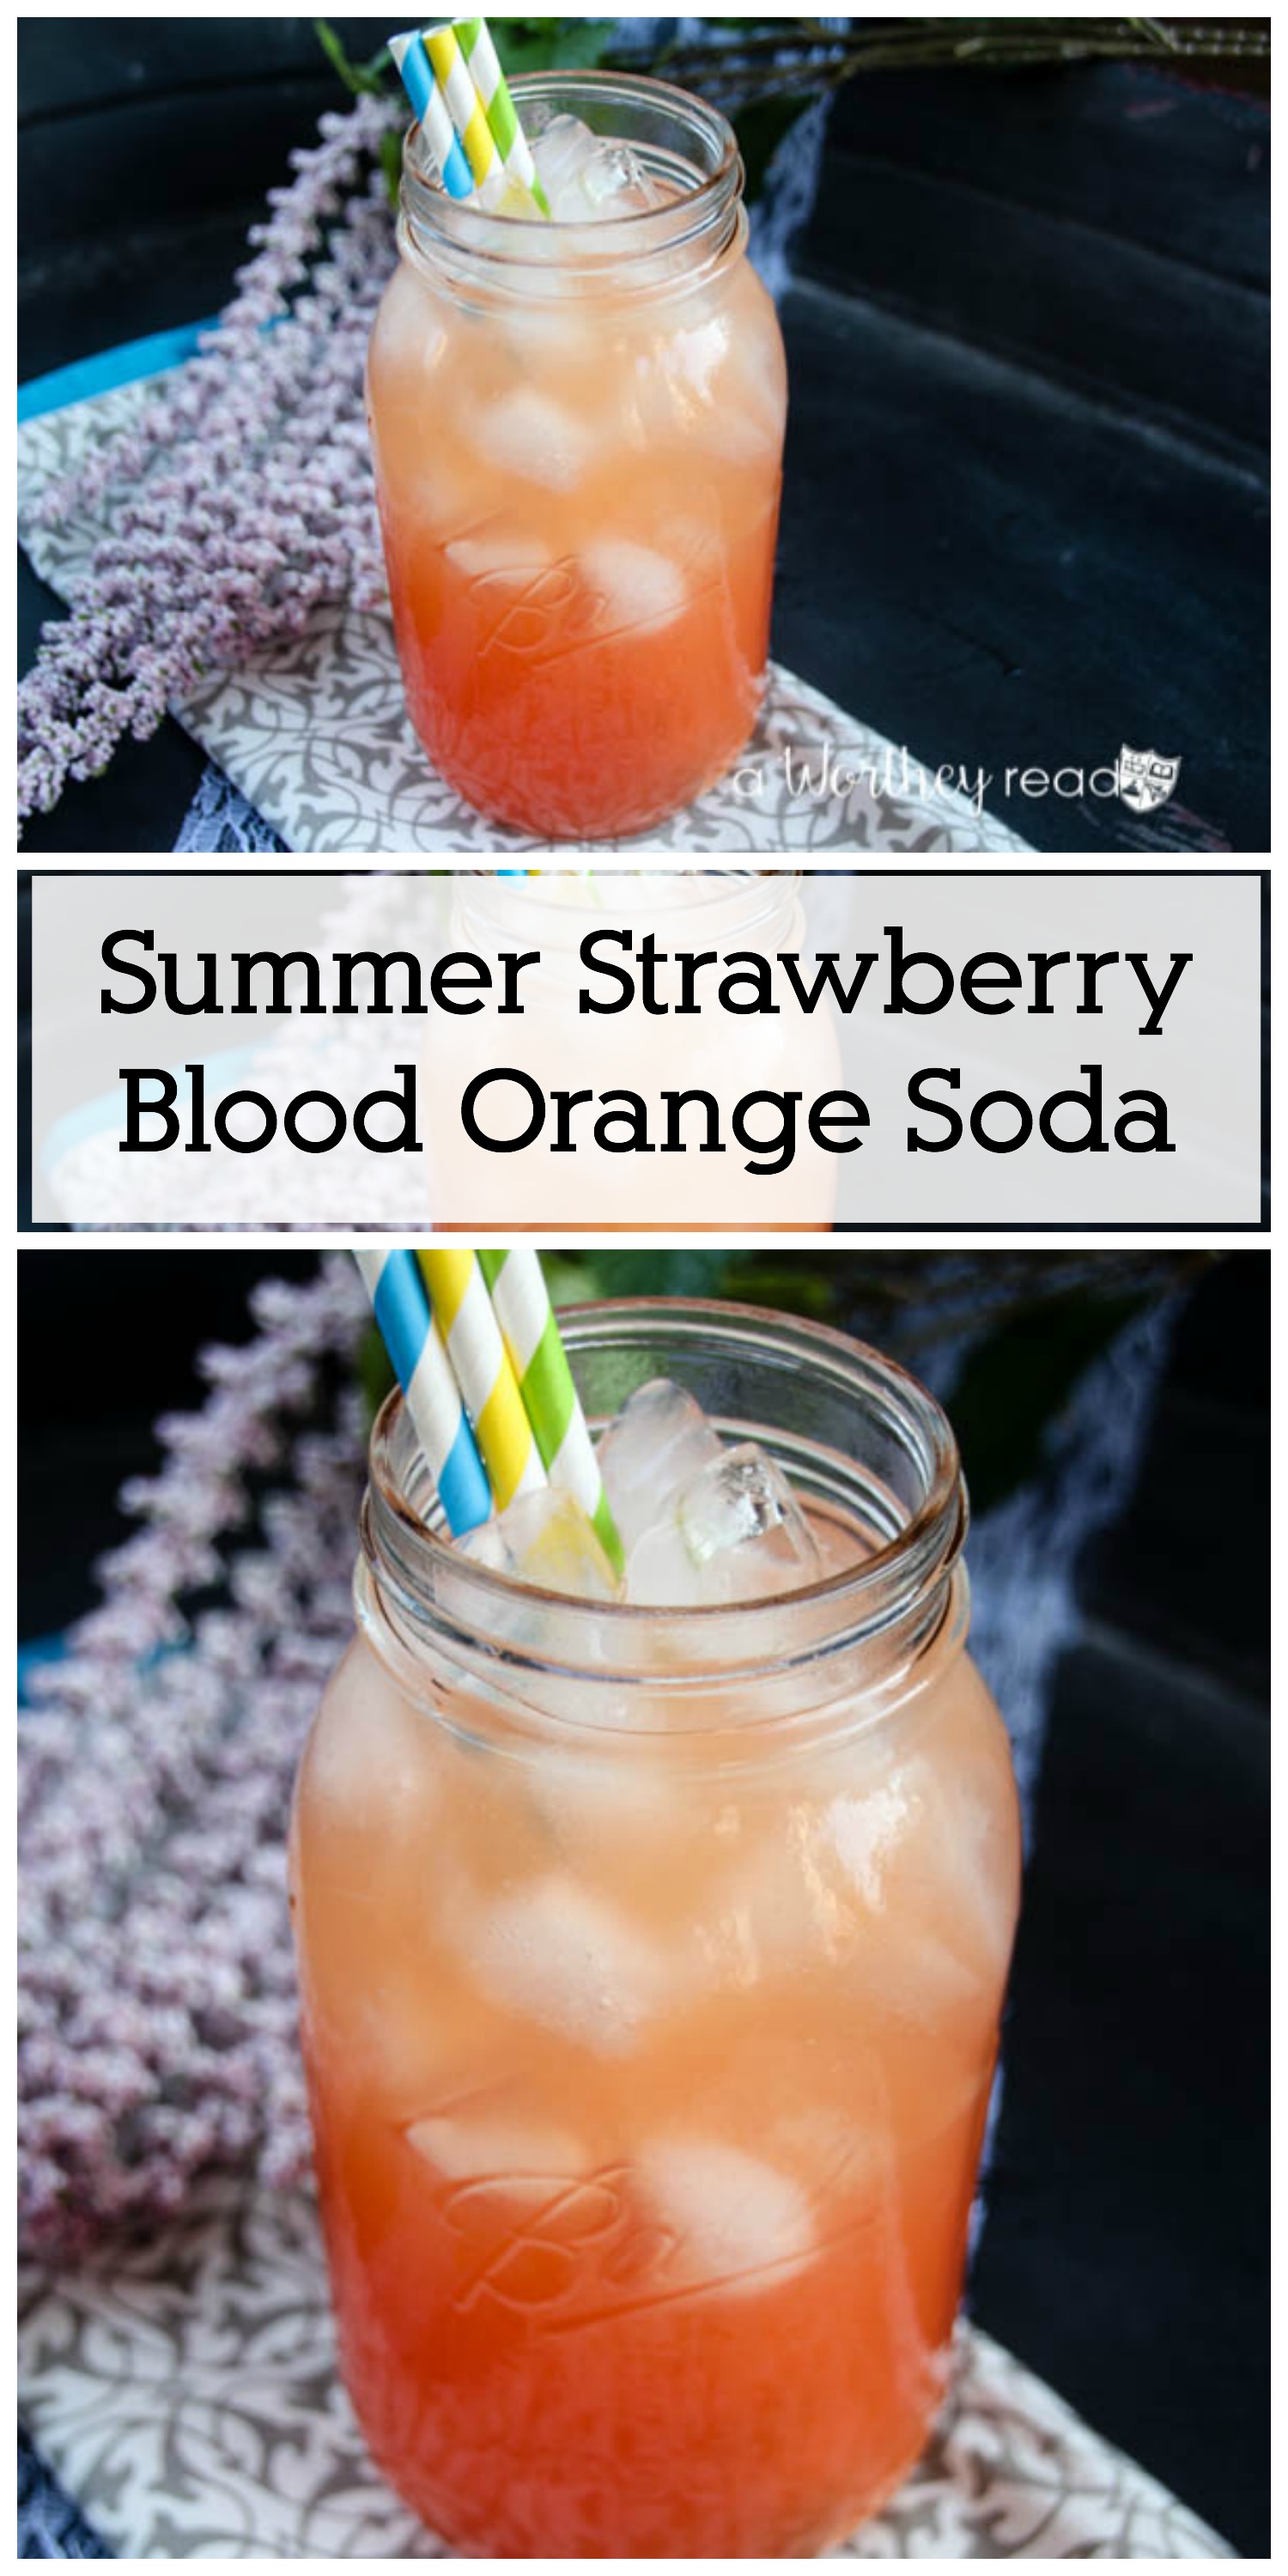 Cool down with a ice-cold refreshing virgin, kid-friendly drink- Summer Strawberry Blood Orange Soda